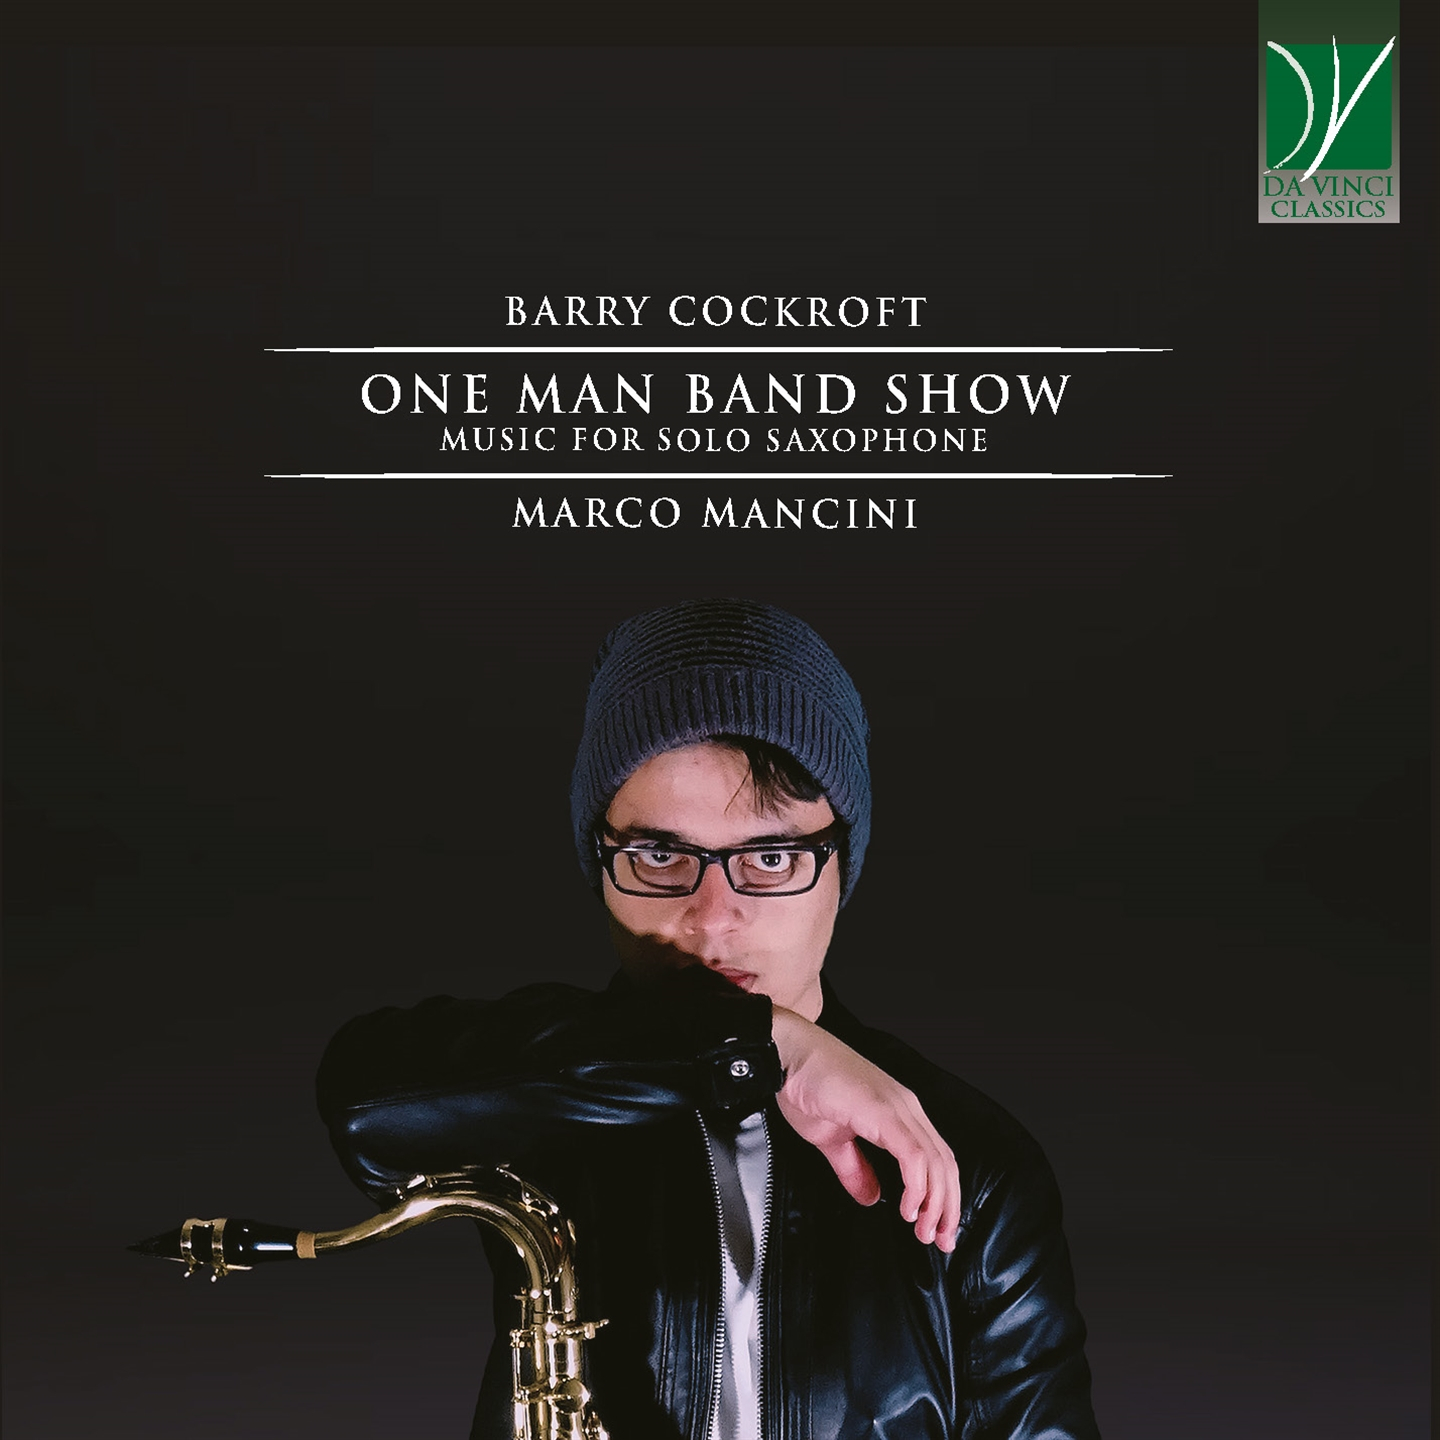 BARRY COCKROFT: ONE MAN BAND SHOW, MUSIC FOR SOLO SAXOPHONE